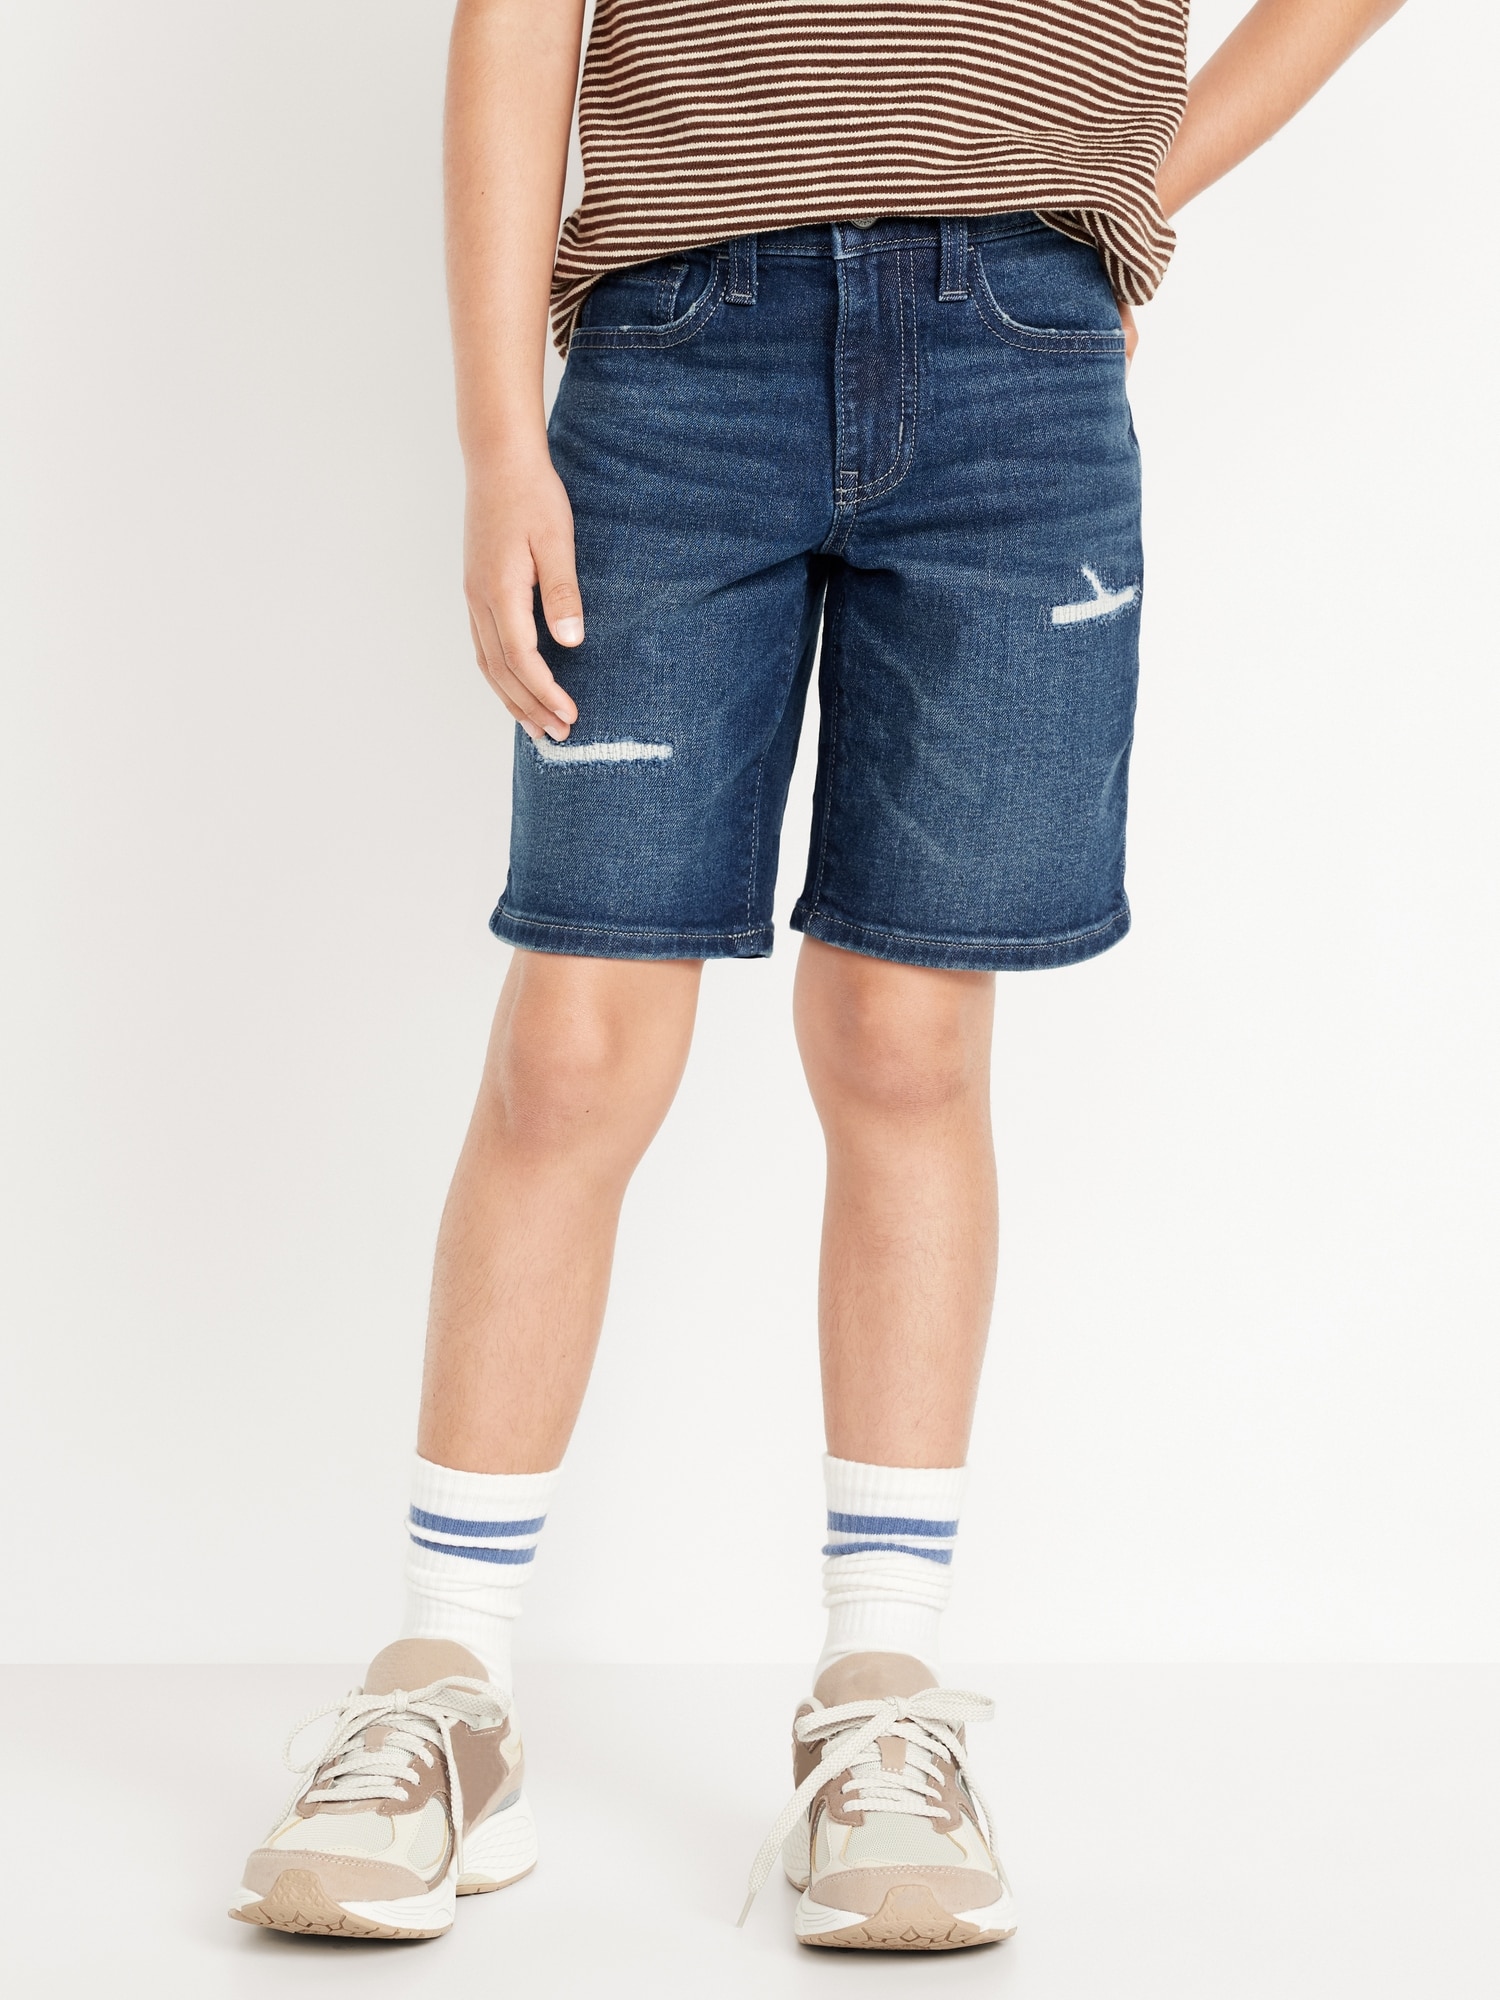 Above Knee 360° Stretch Ripped Jean Shorts for Boys Hot Deal